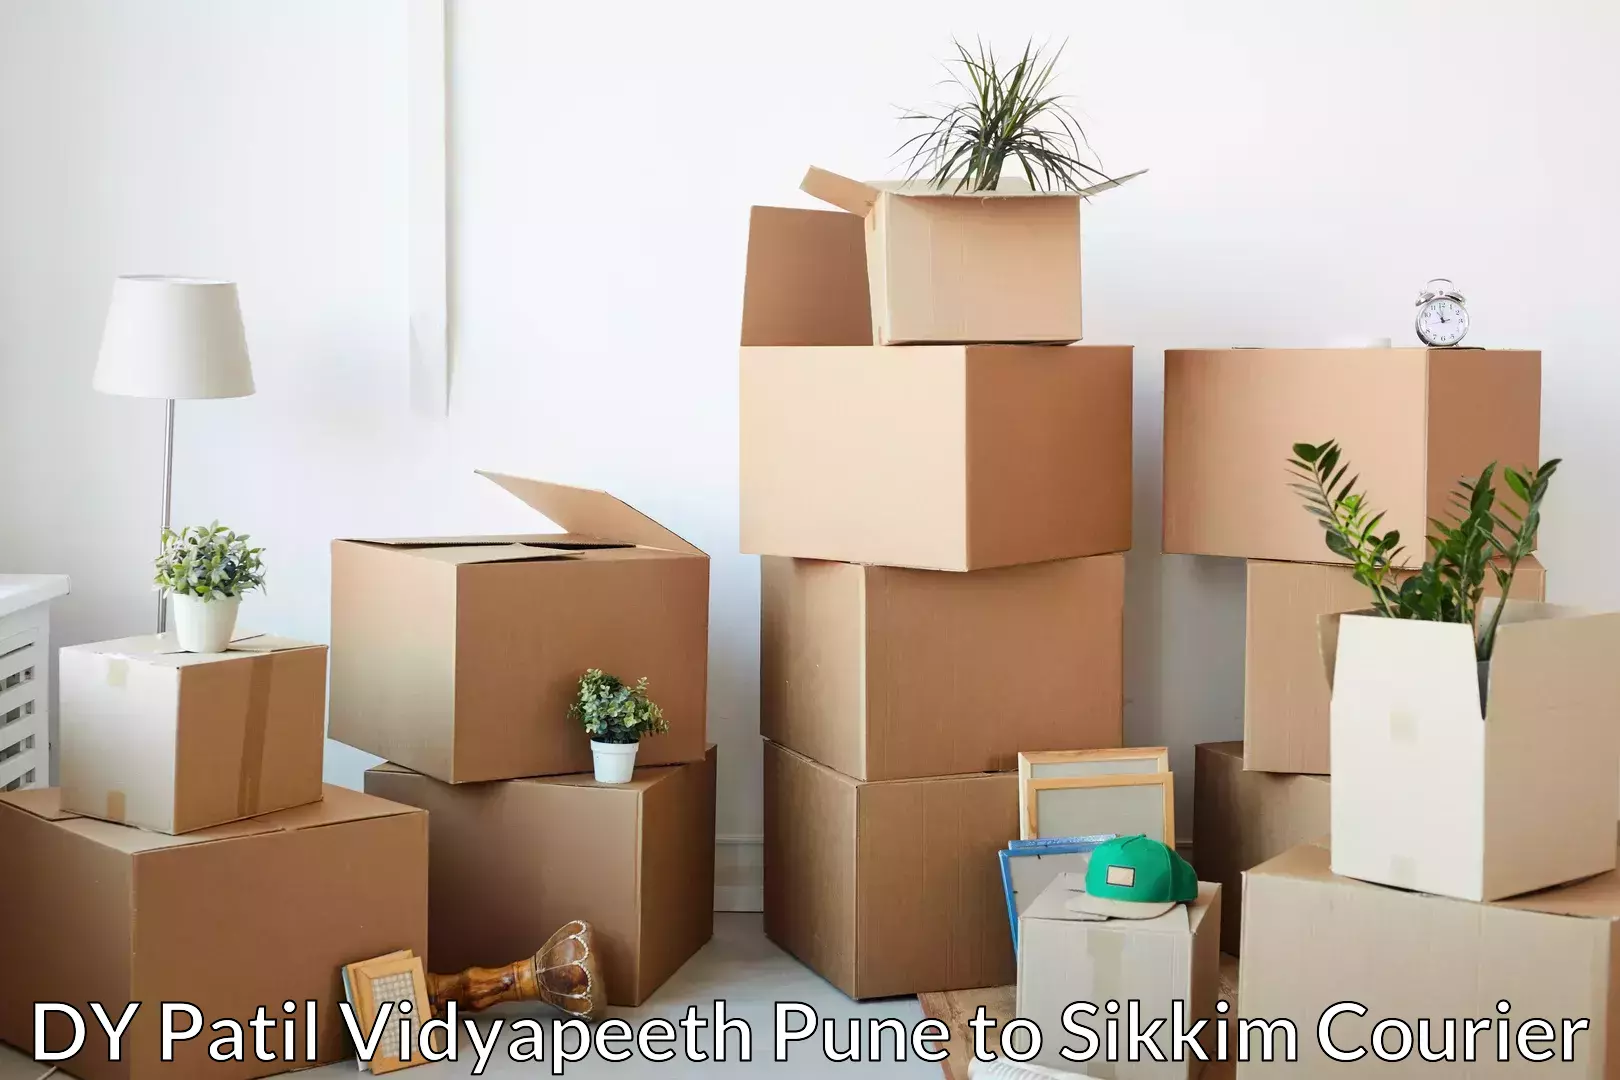 Skilled furniture movers DY Patil Vidyapeeth Pune to Jorethang